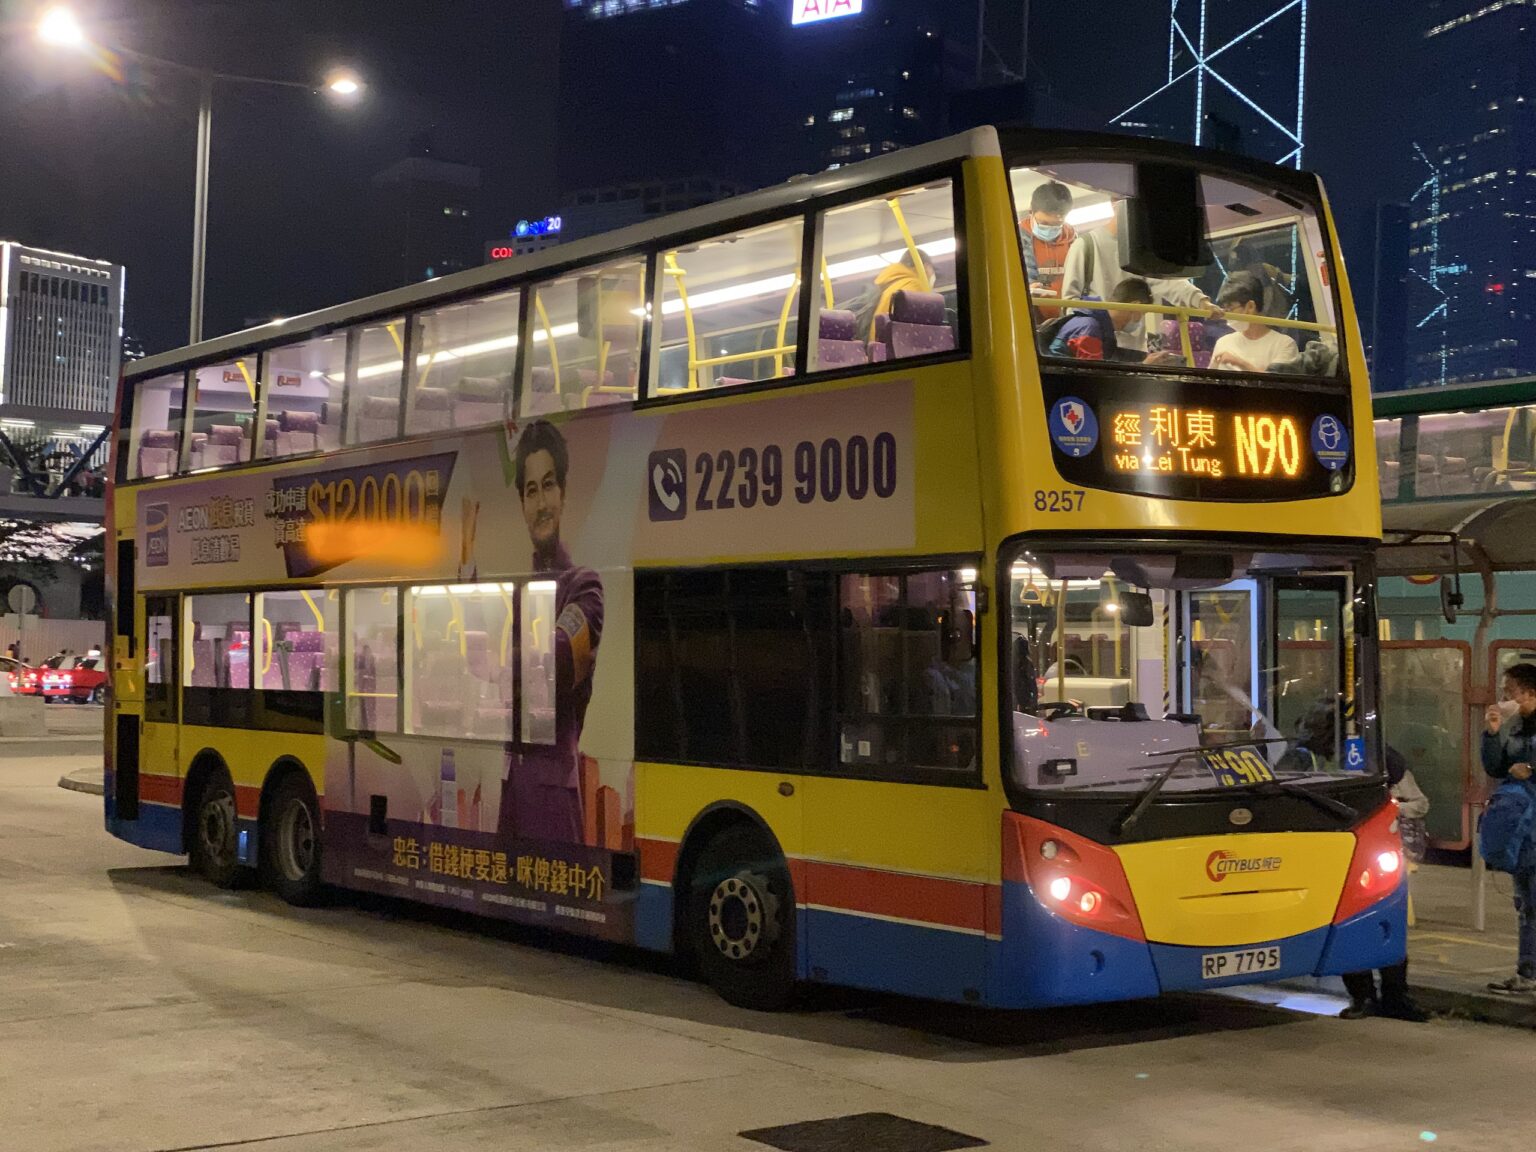 a citybus overnight bus service in hong kong